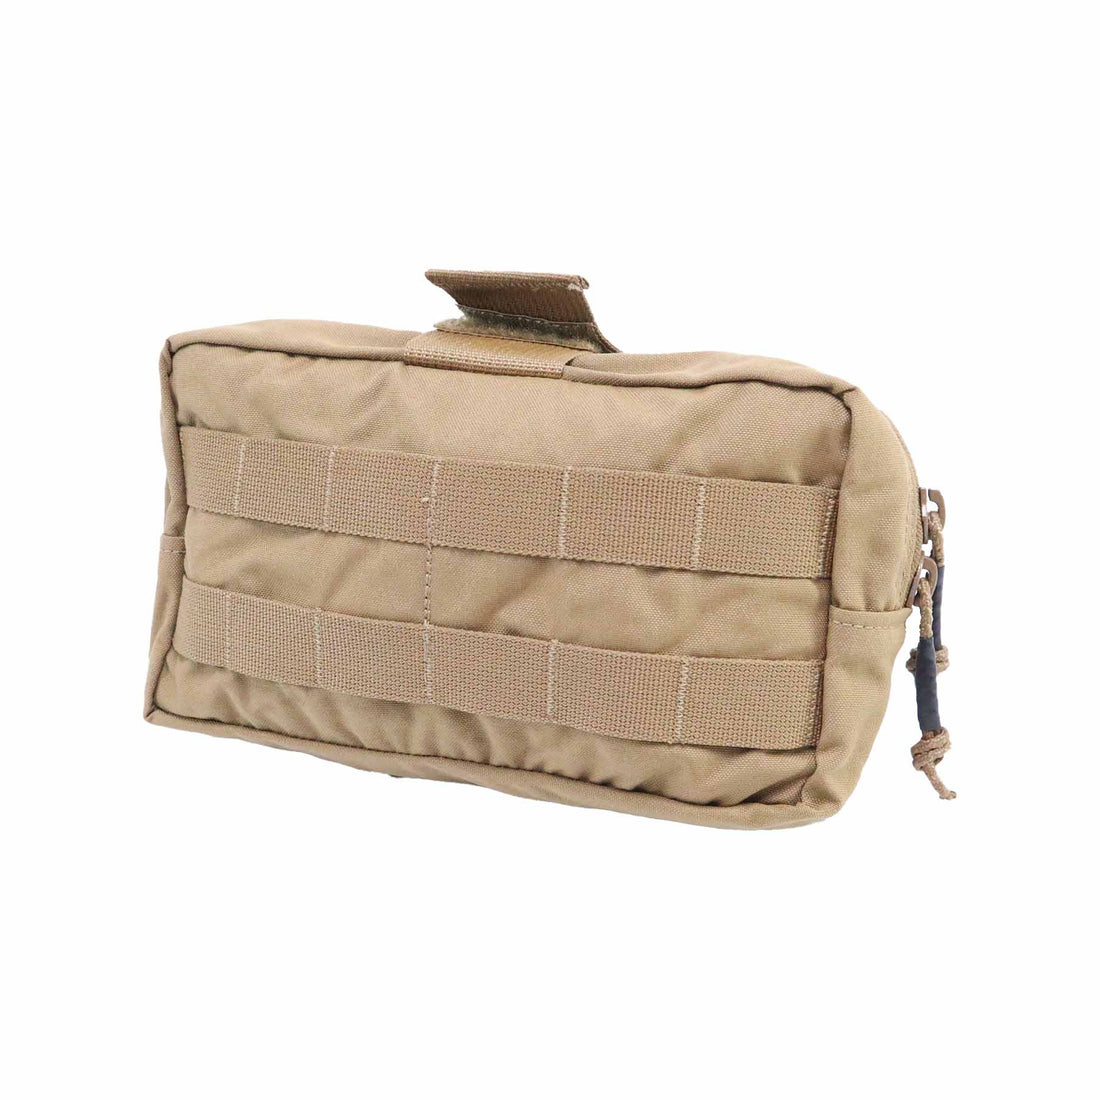 Gear - Pouches - Utility - Eagle Industries 9x3x5 MOLLE Utility Pouch